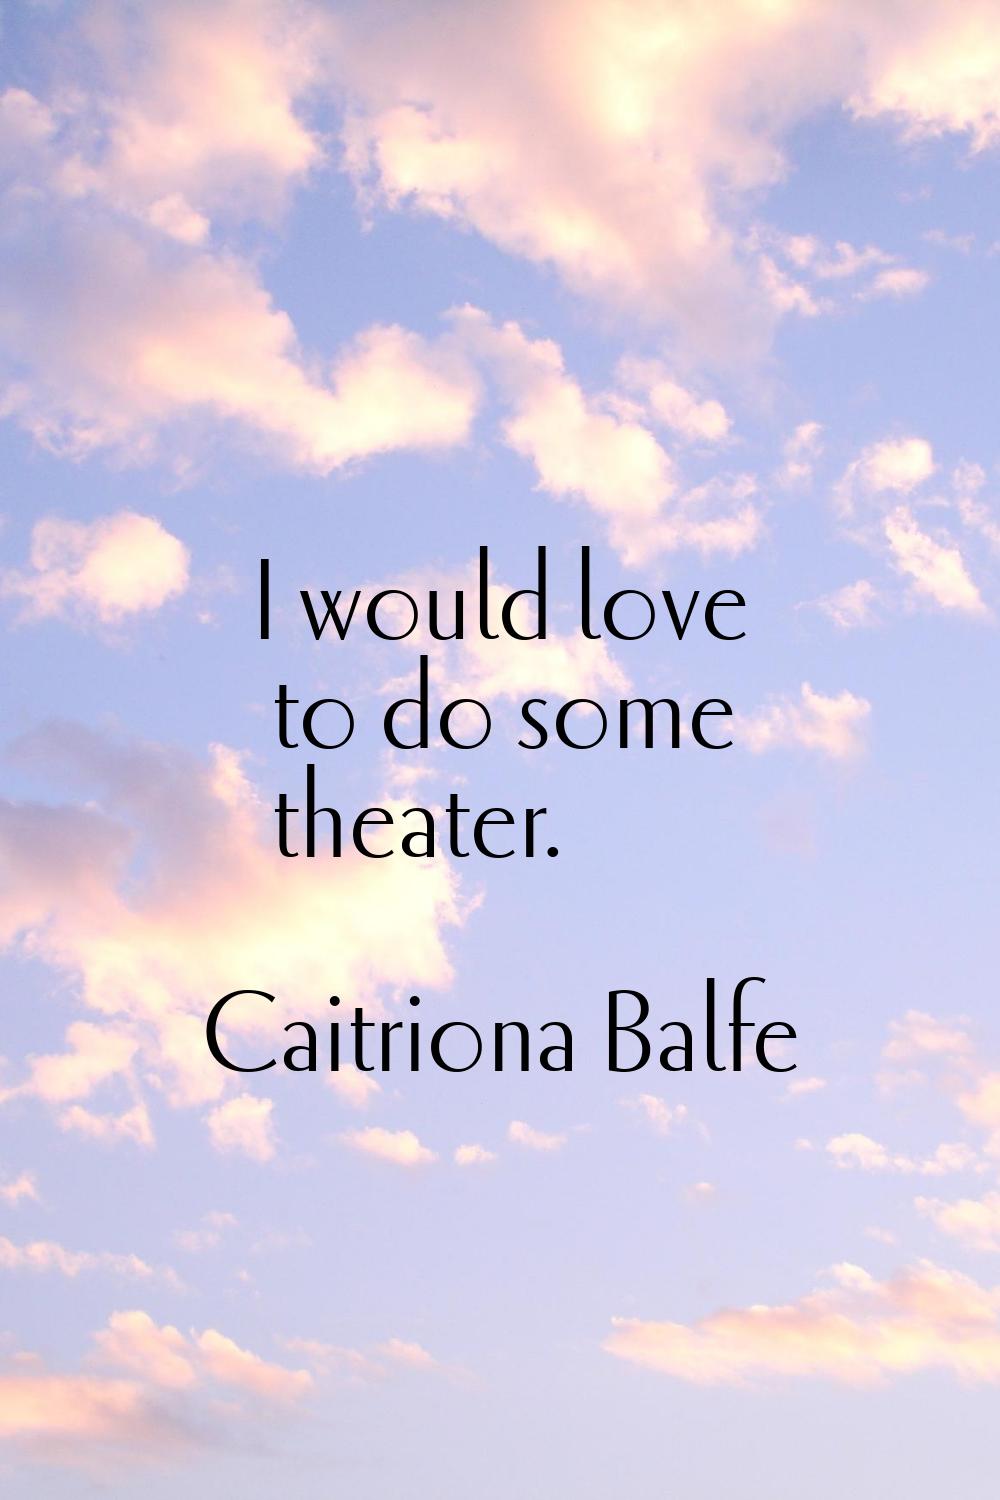 I would love to do some theater.